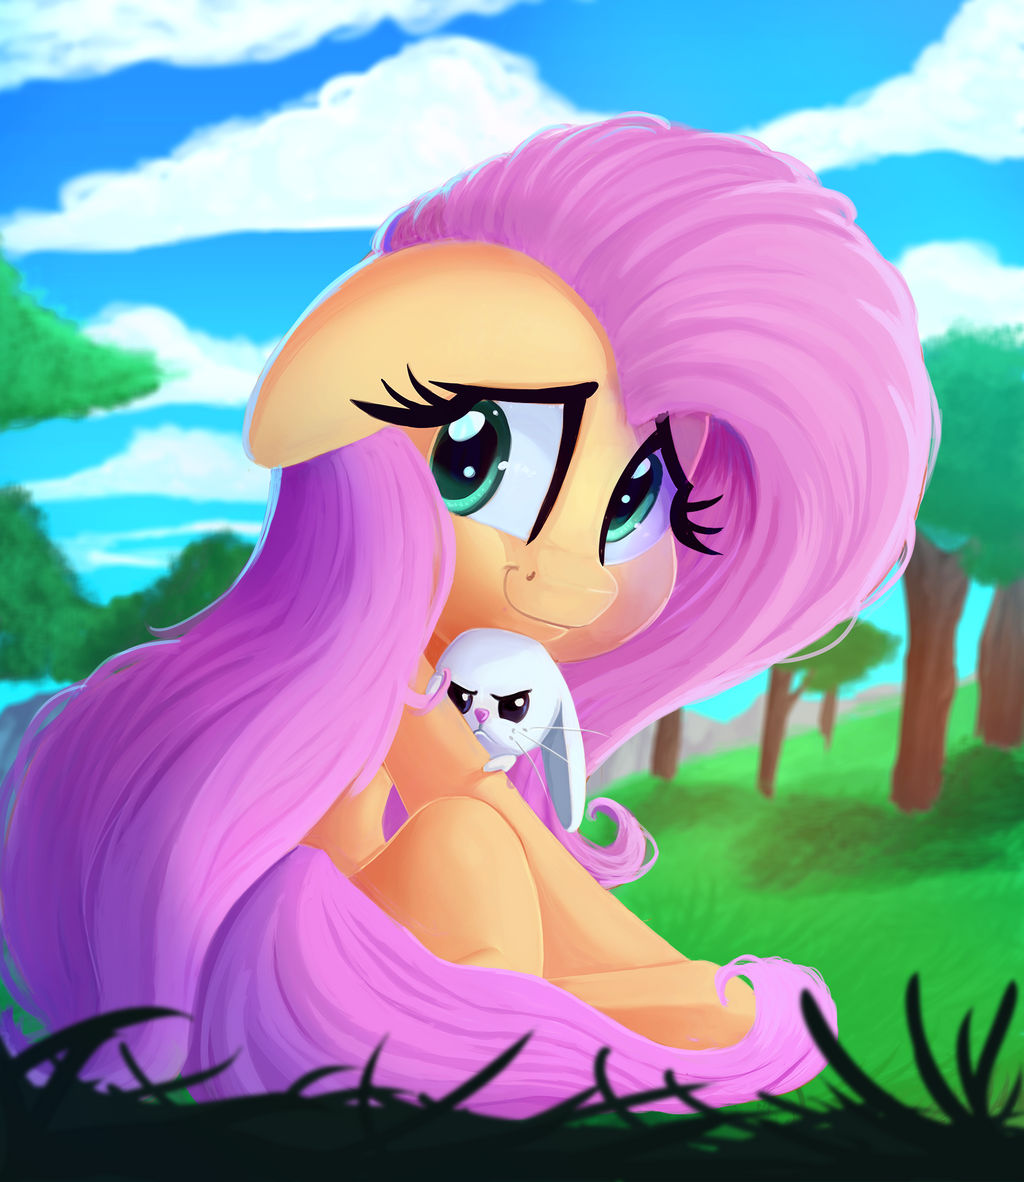 shy_and_her_guardian_angel_by_thediscorded_ddq1gr1-fullview.jpg